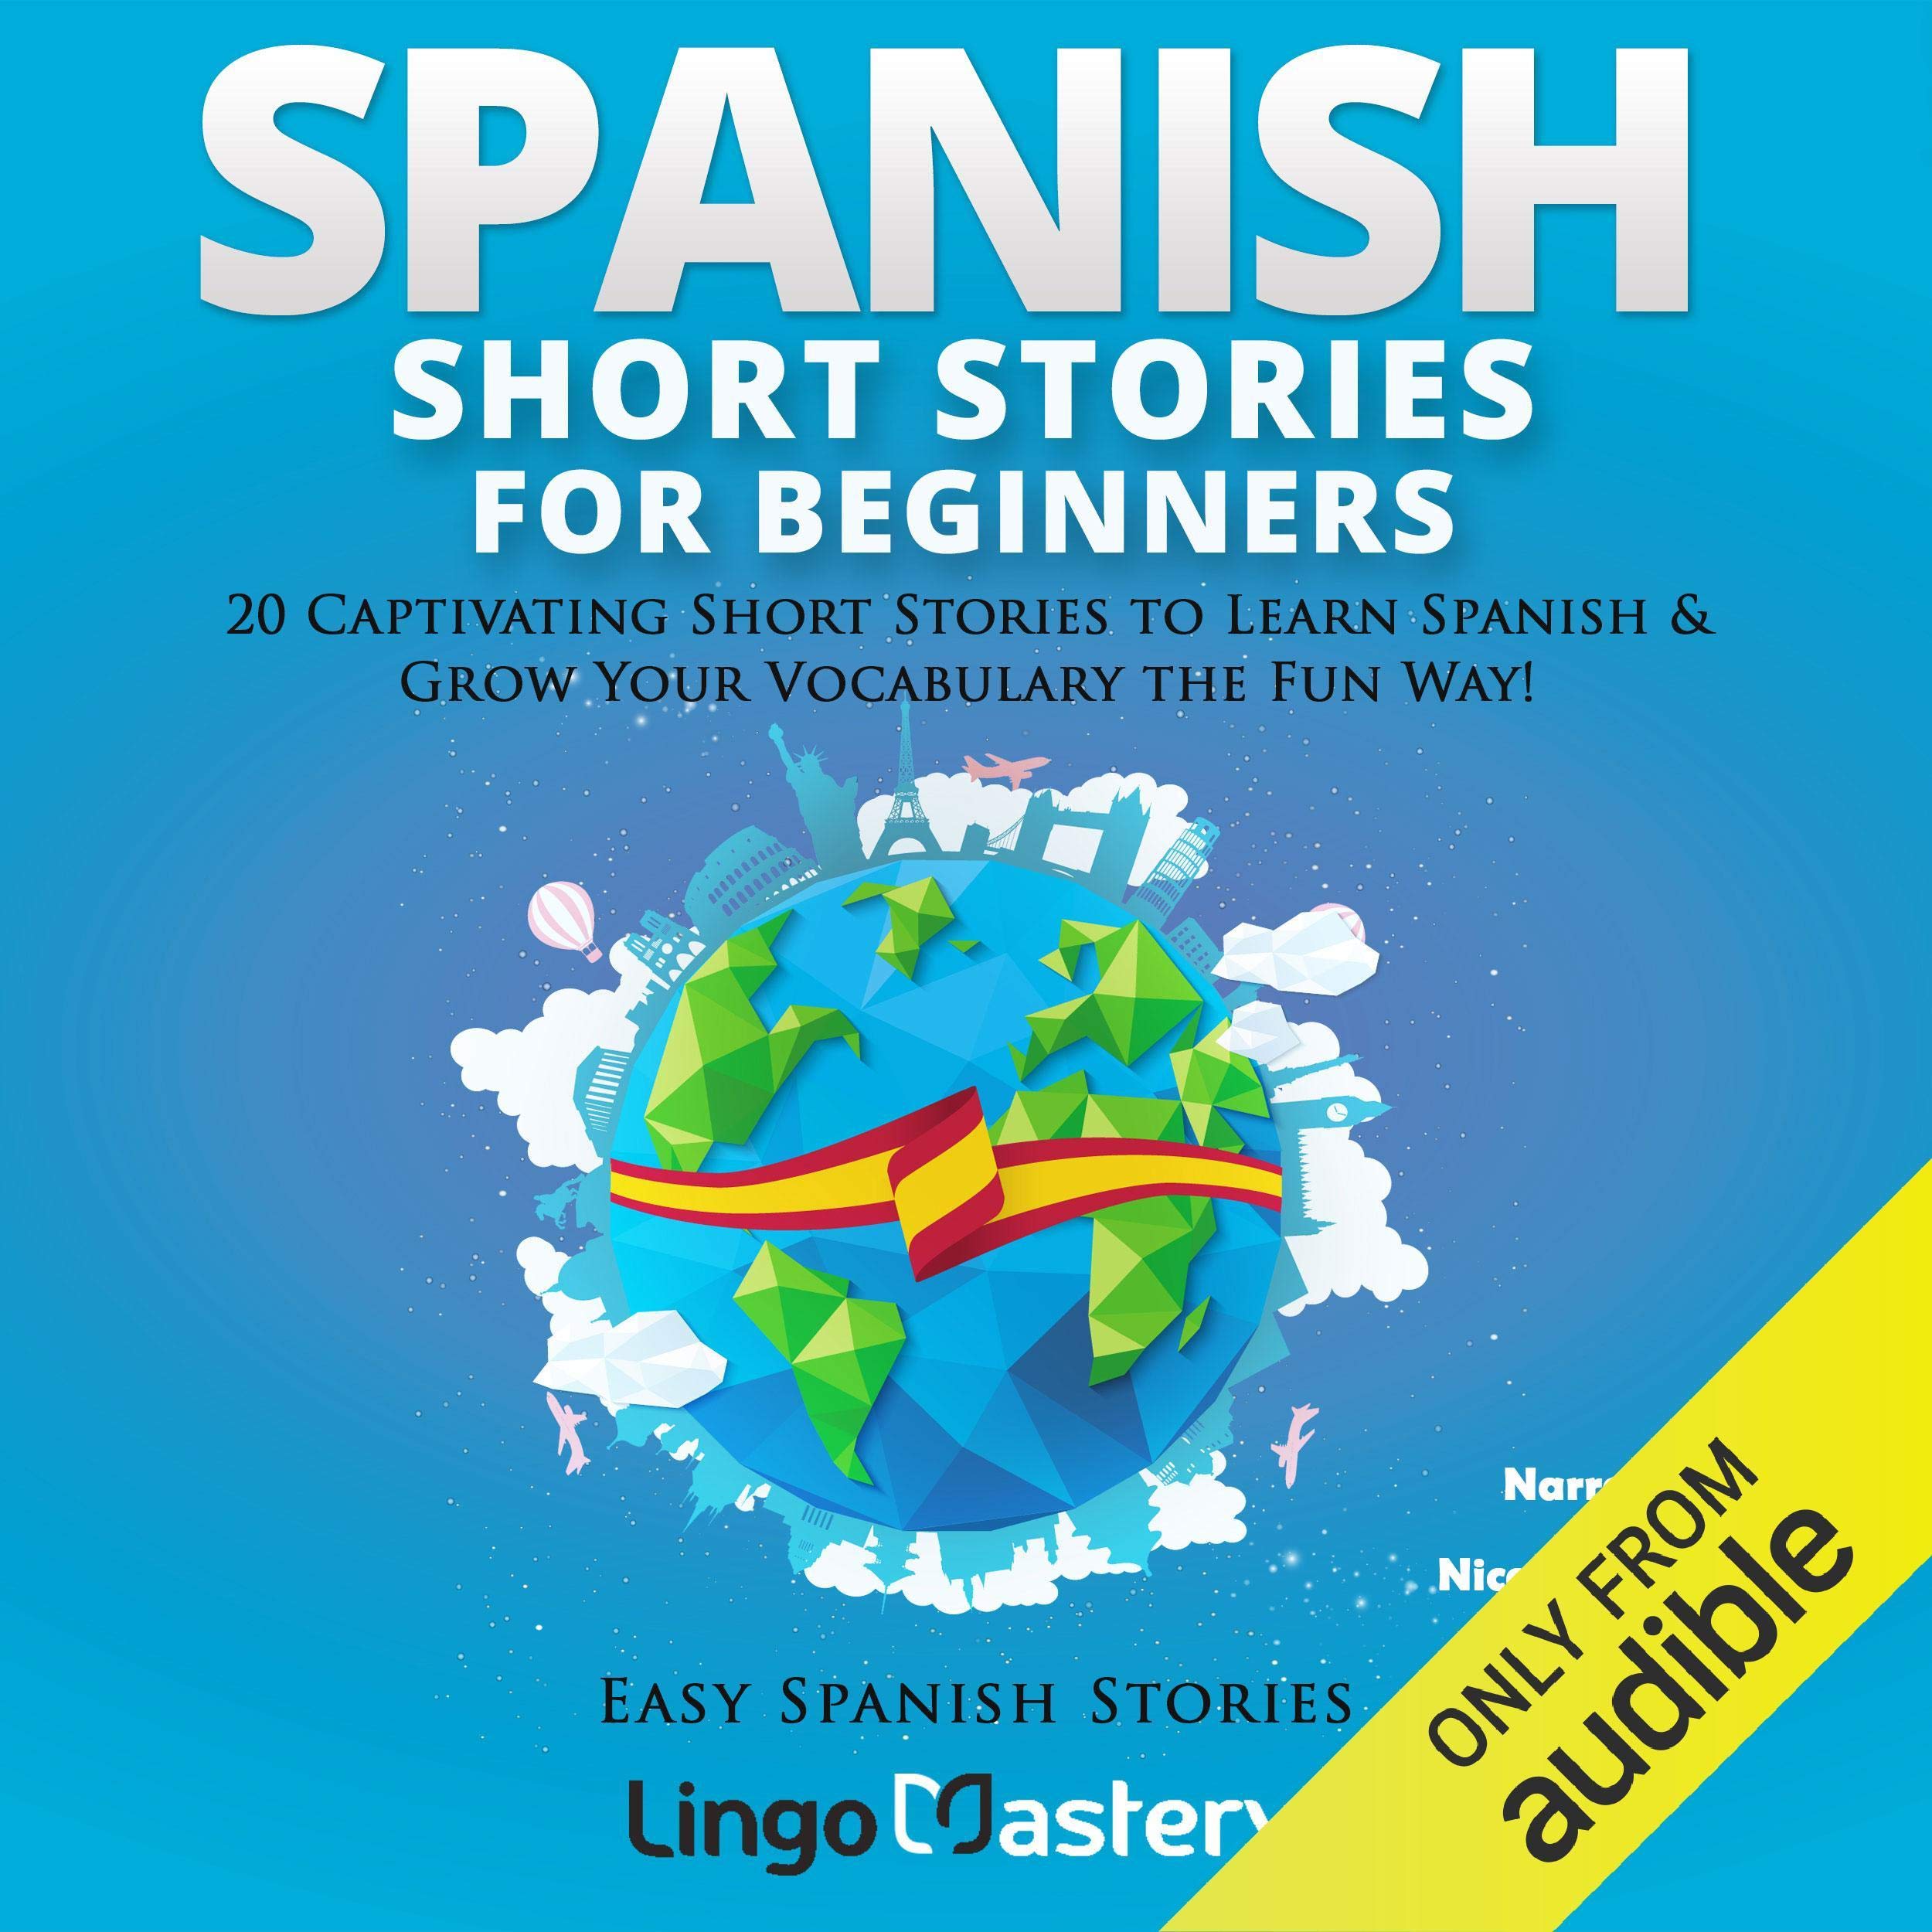 Spanish Short Stories for Beginners: 20 Captivating Short Stories to Learn Spanish & Grow Your Vocabulary the Fun Way!: Easy Spanish Stories, Book 1